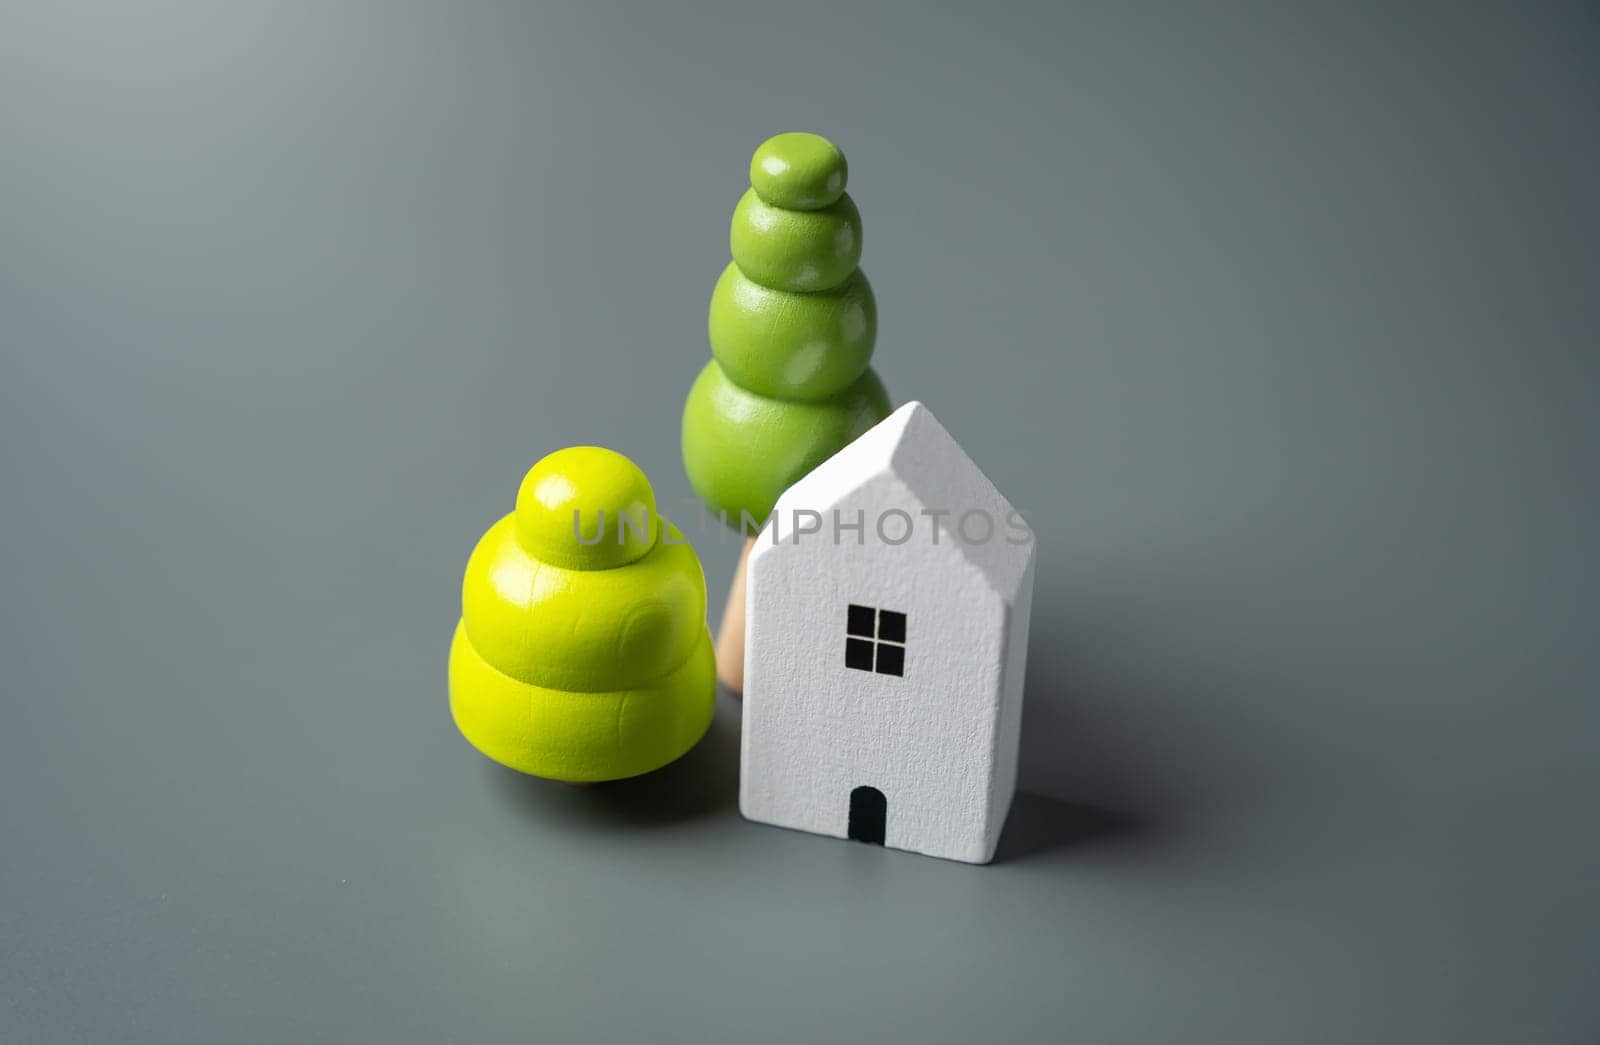 House and decorative trees, figurines. Housing prices. Buying and selling real estate. by iLixe48